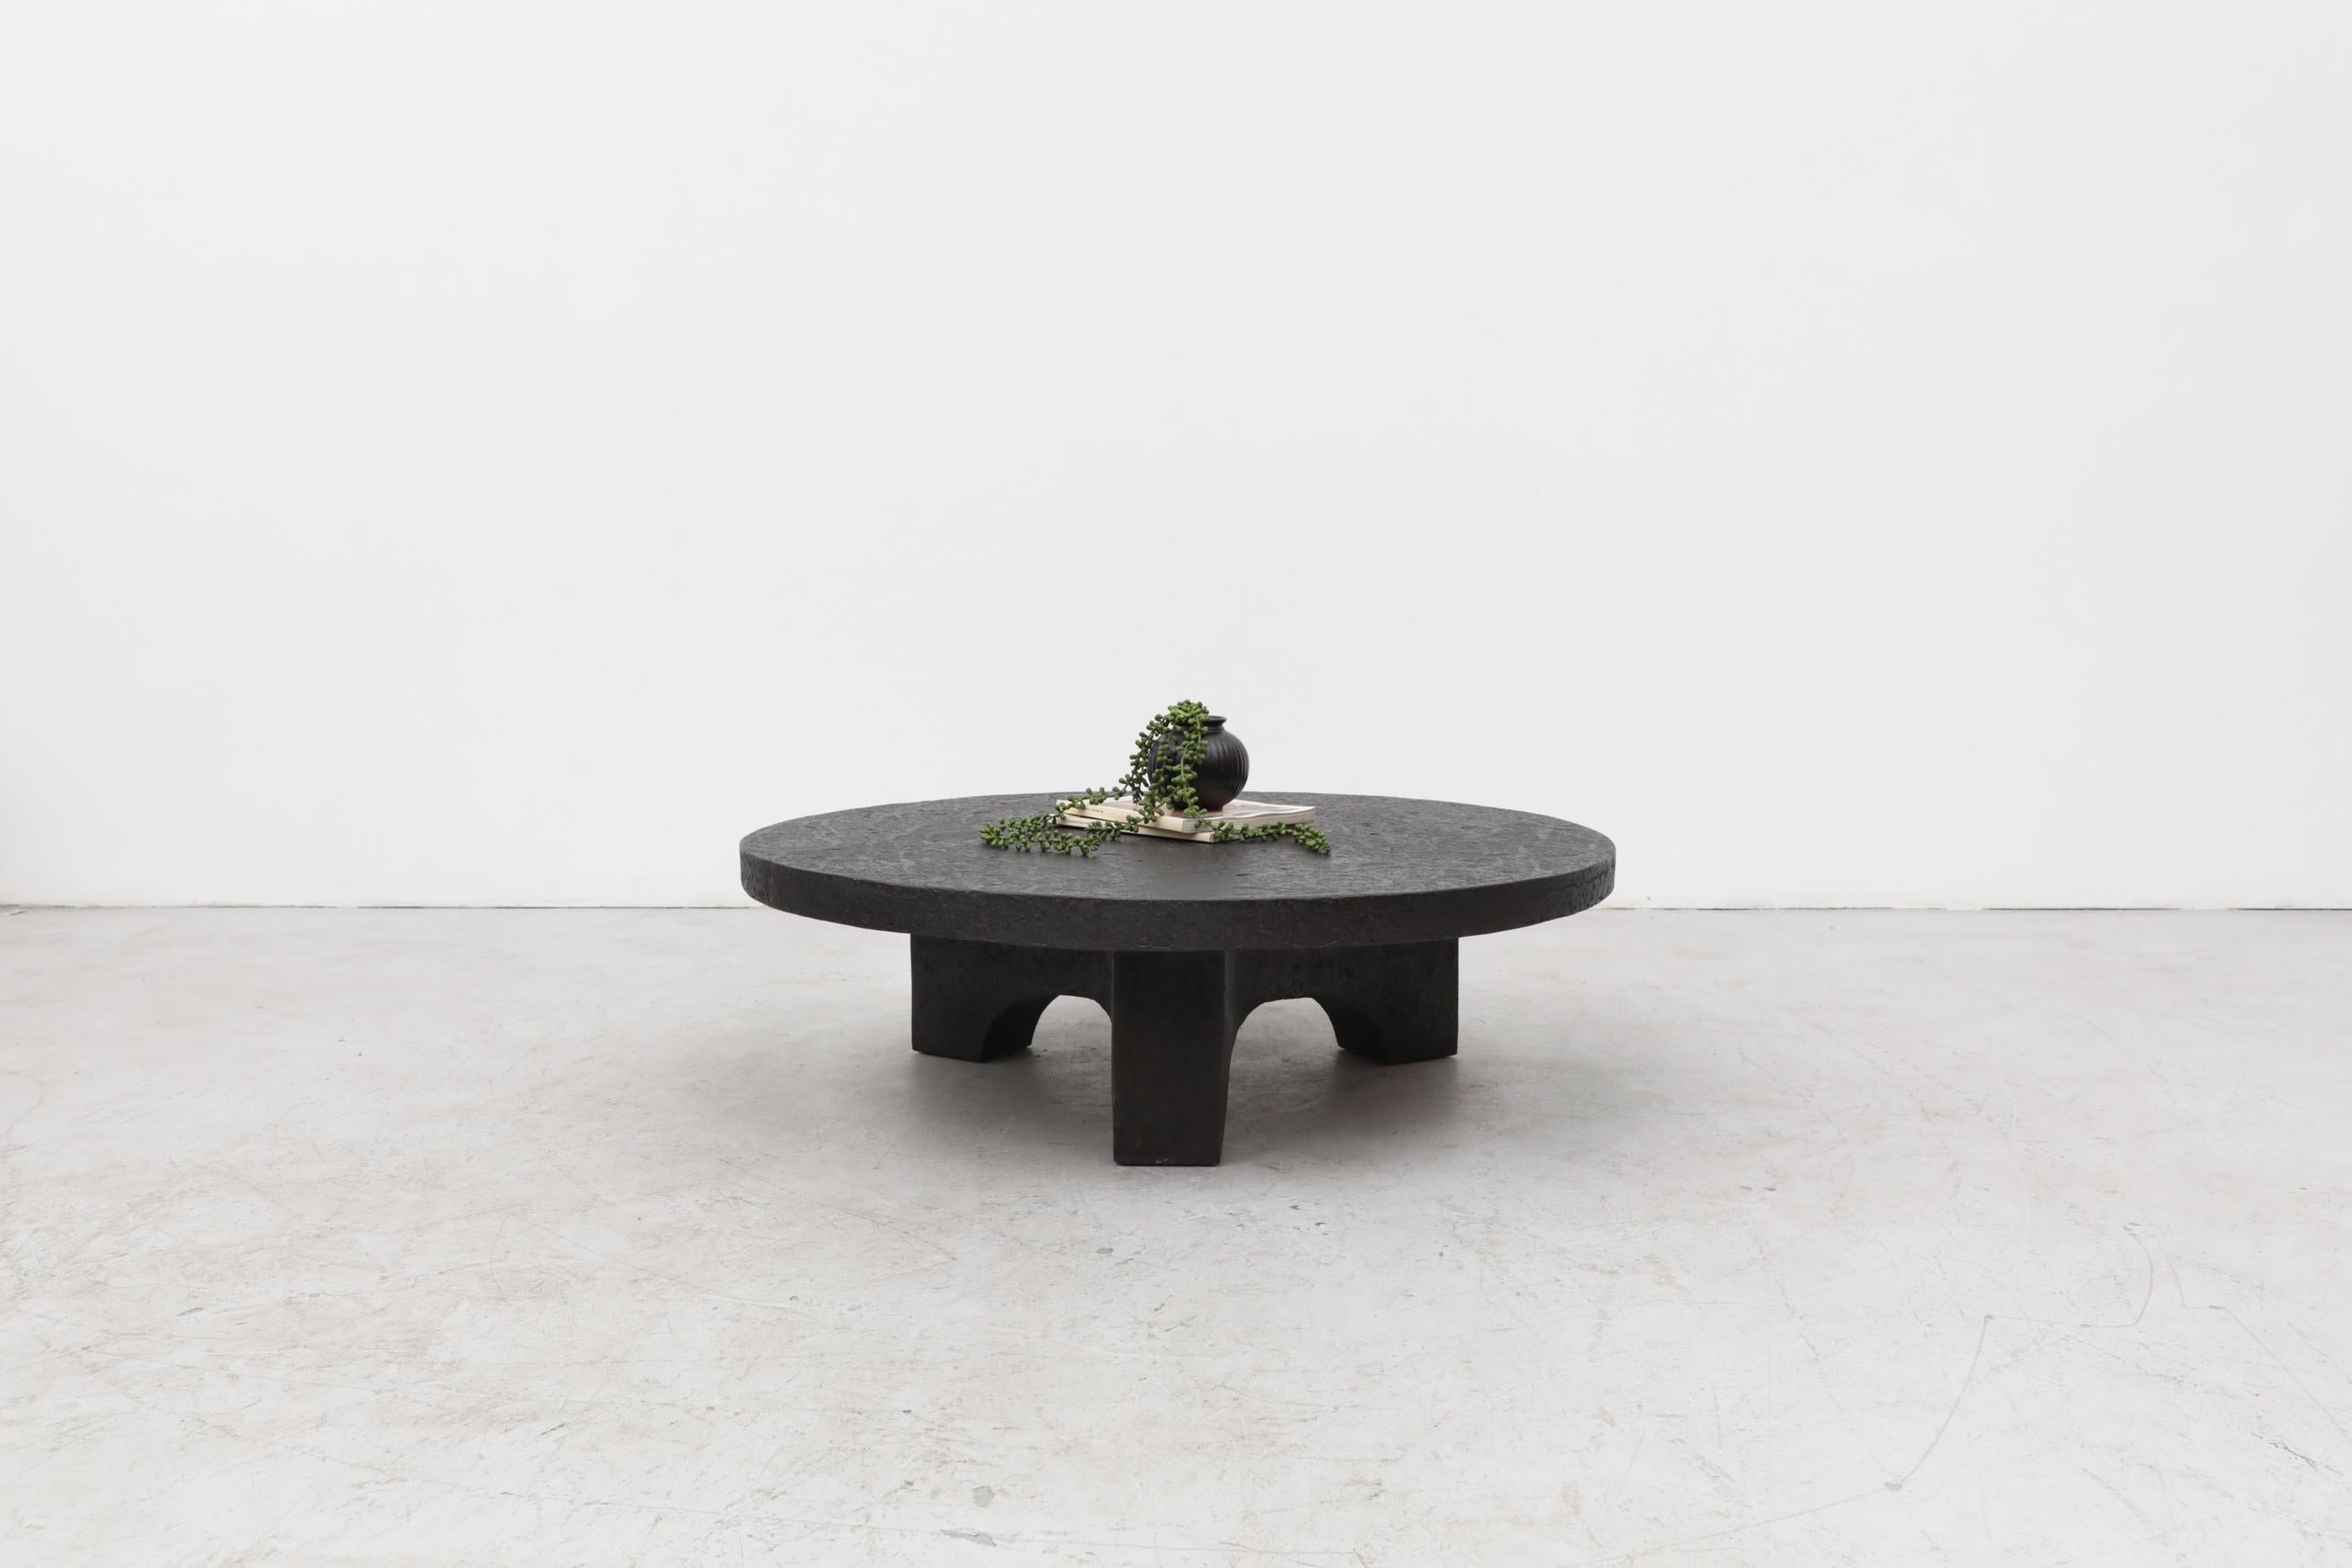 Round faux lava stone coffee or side table with arched base made of heavy cast resin and in original condition with wear consistent with its age and use. Other faux lava stone tables are available and listed separately (T442).